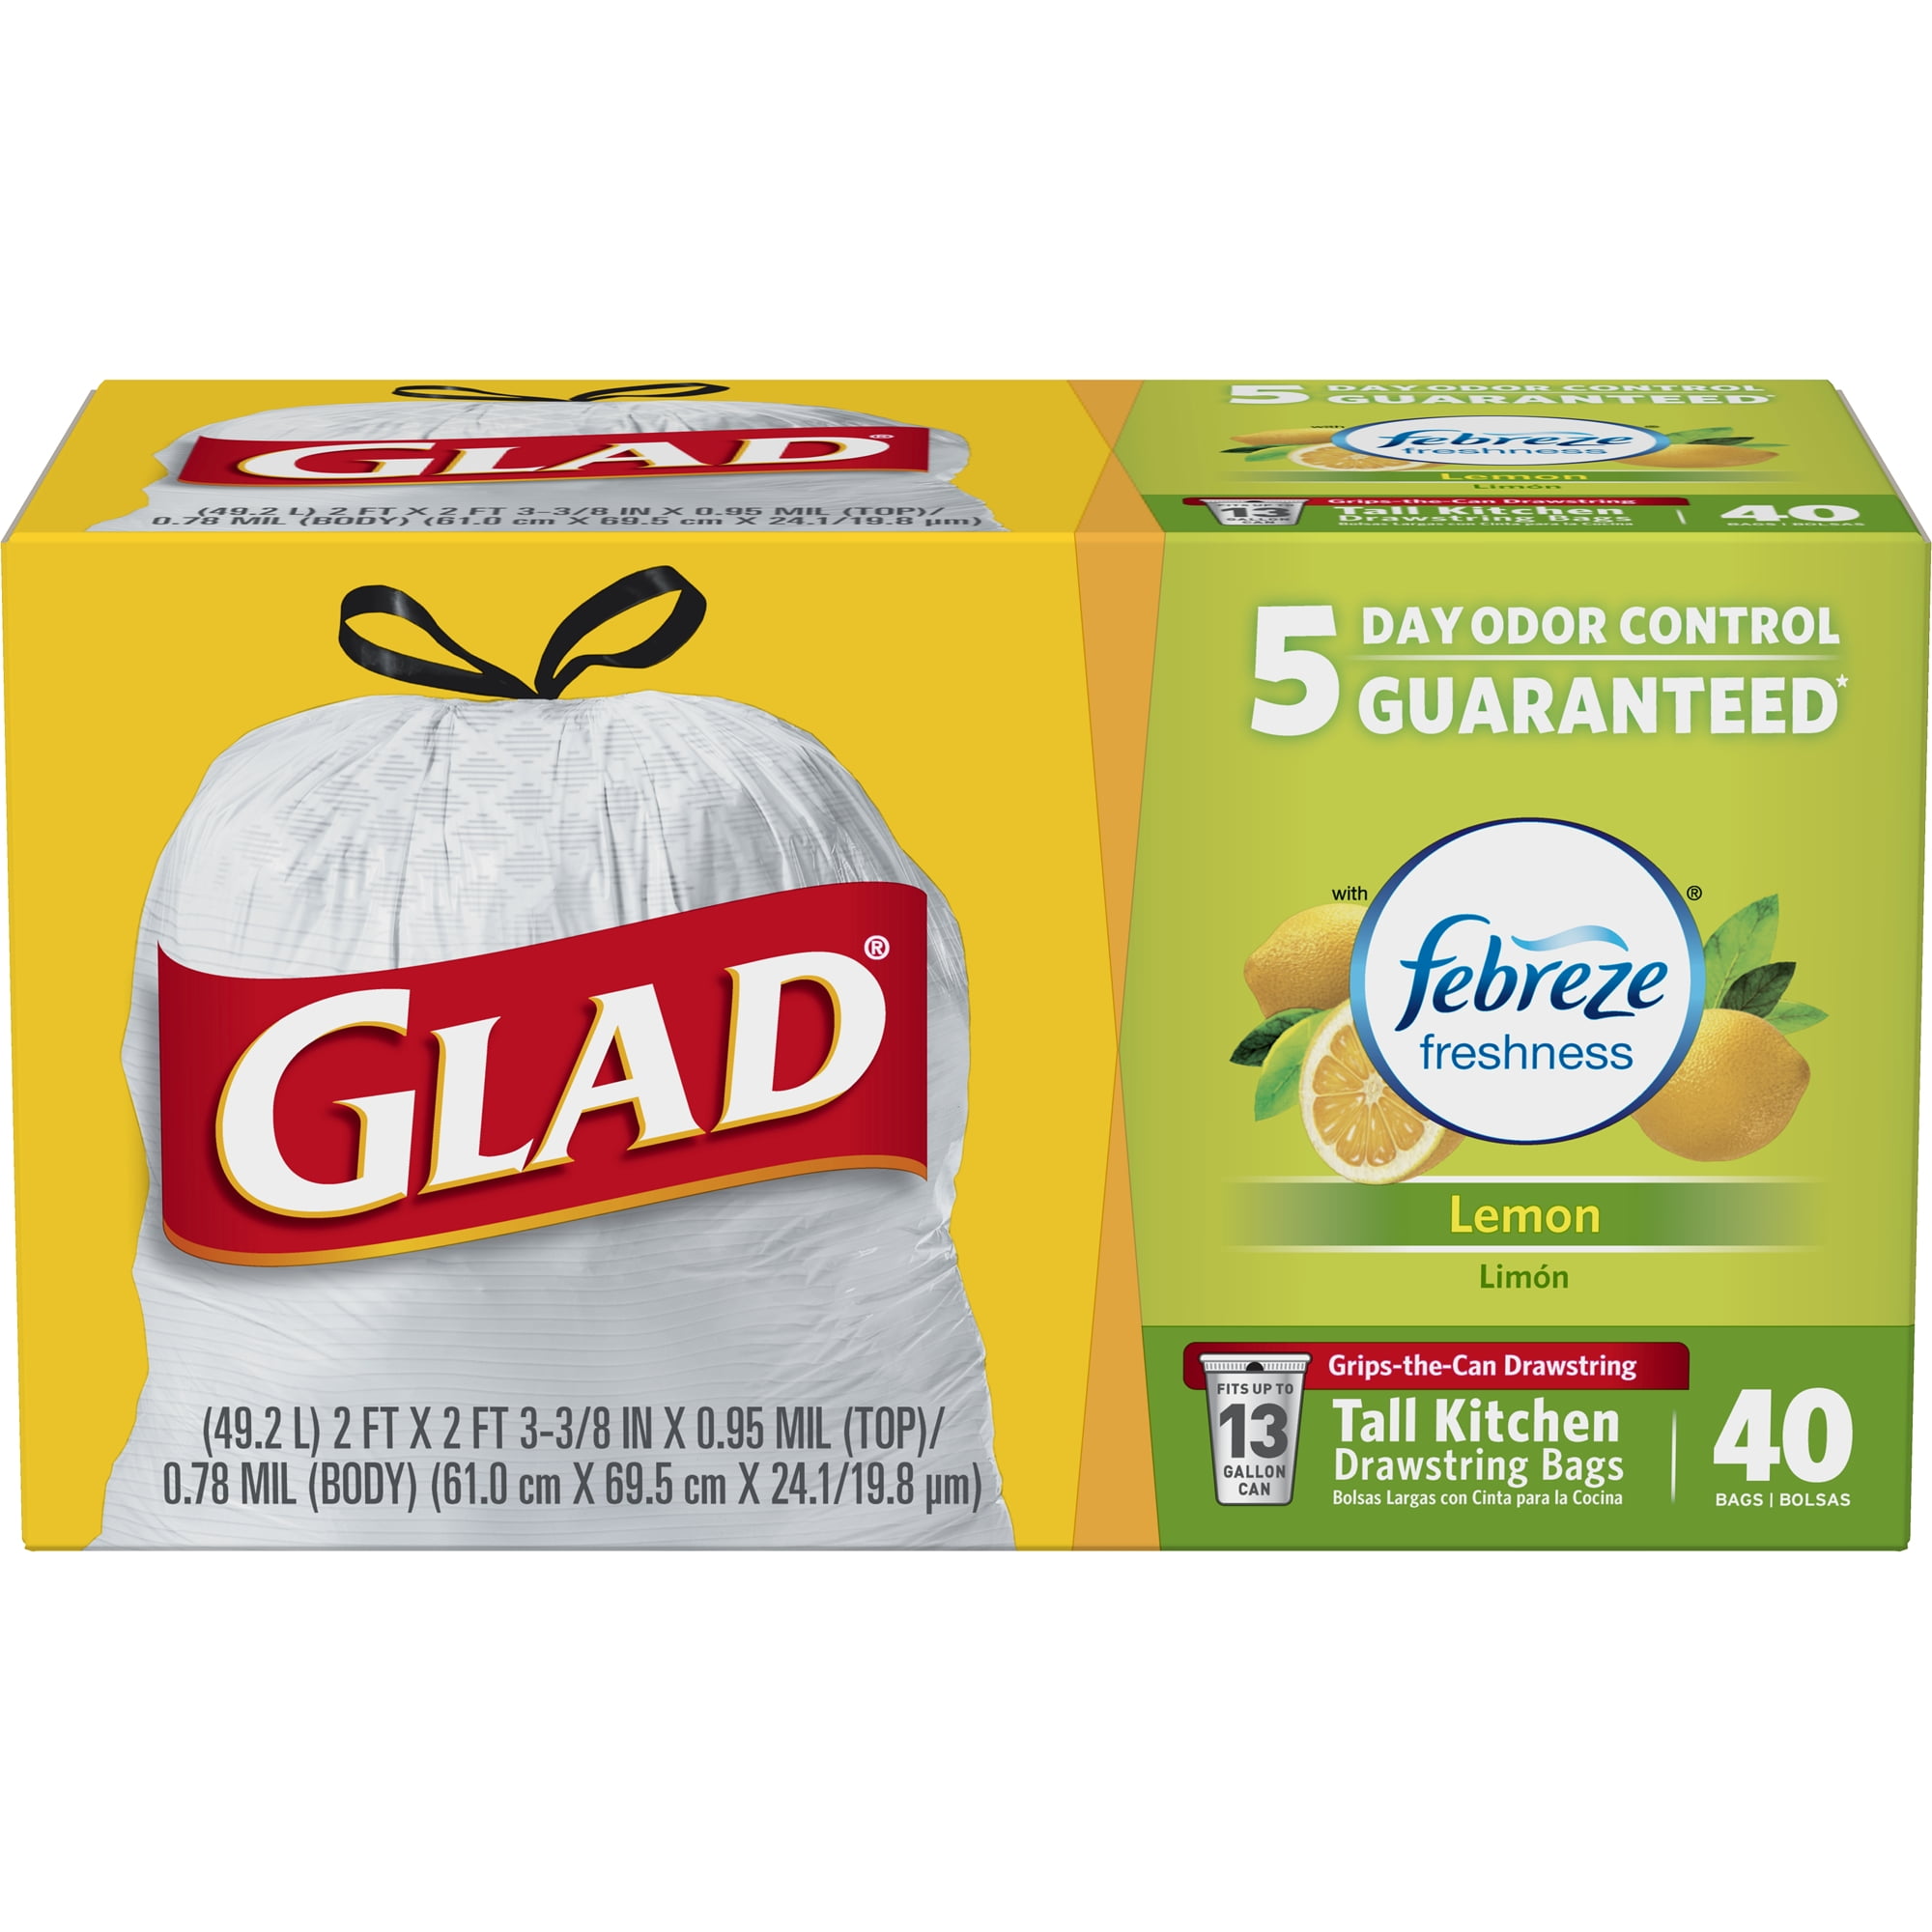 Buy Glad 100% Compostable OdorShield Quick-Tie Small Trash Bags, Lemon Scent,  2.6 Gallon, 20 Count Now! Only $